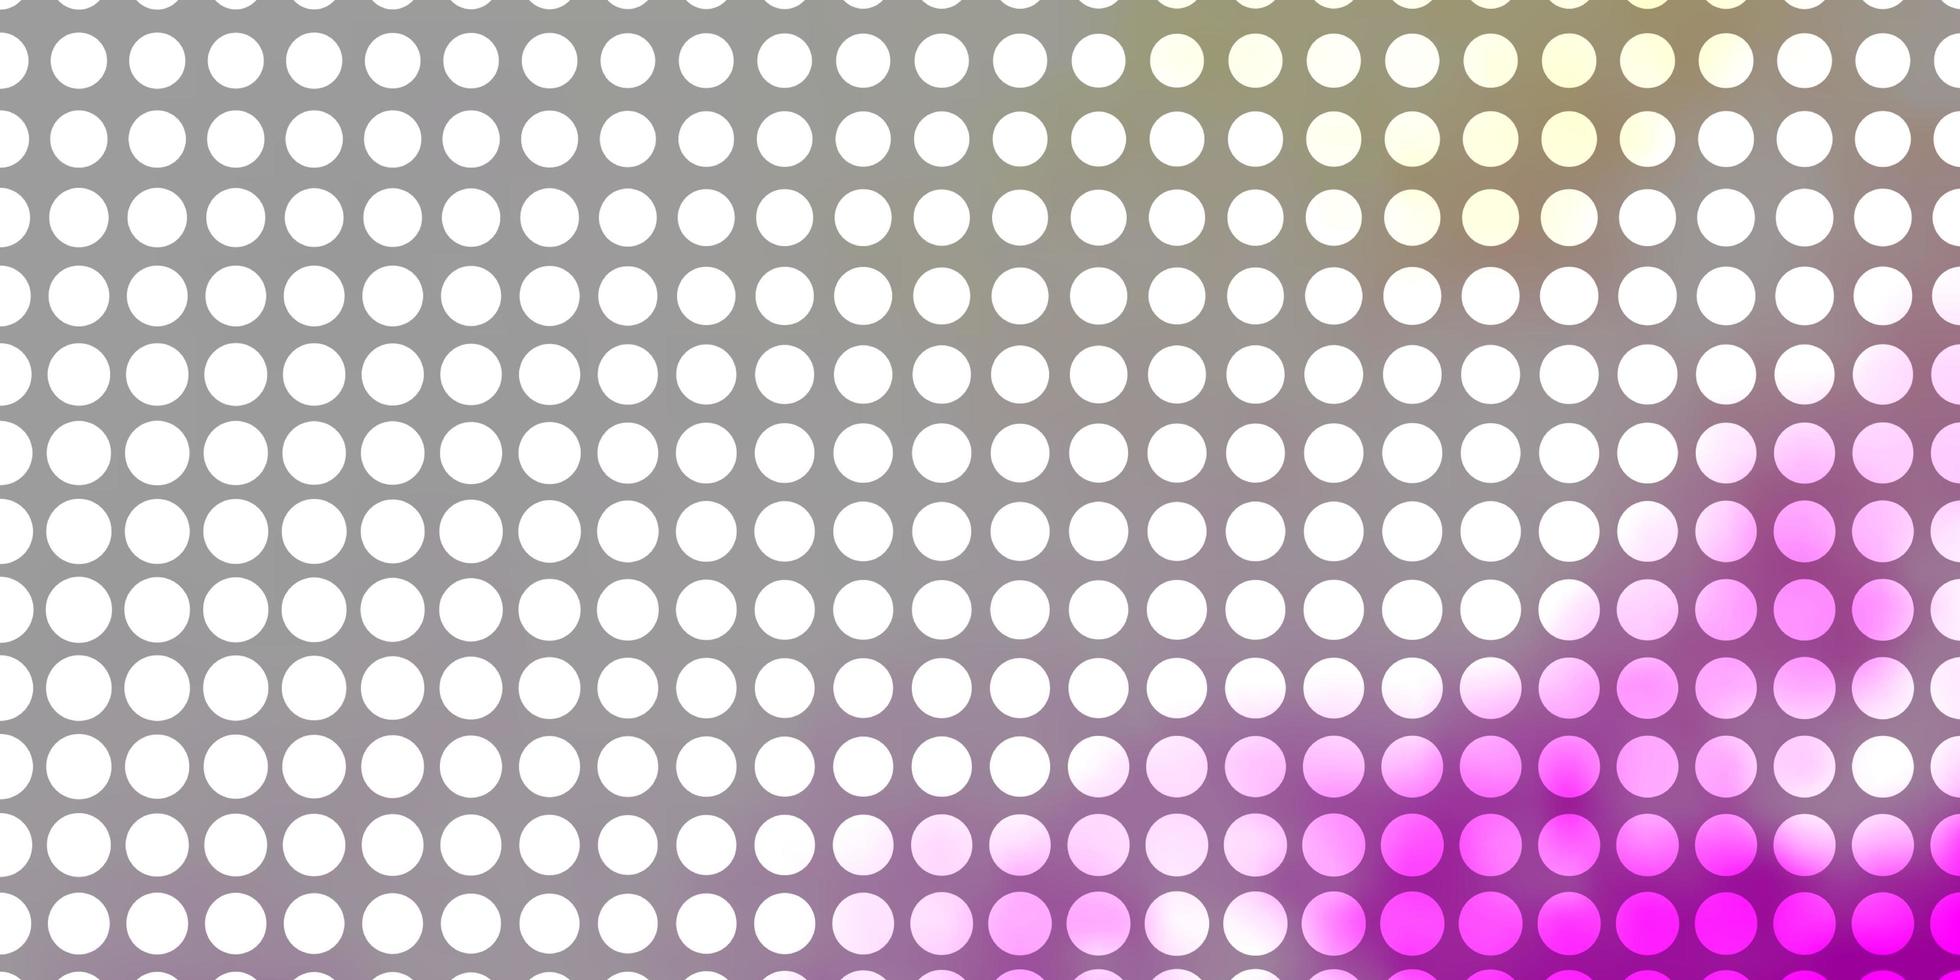 Light Pink, Yellow vector background with circles. Colorful illustration with gradient dots in nature style. New template for your brand book.